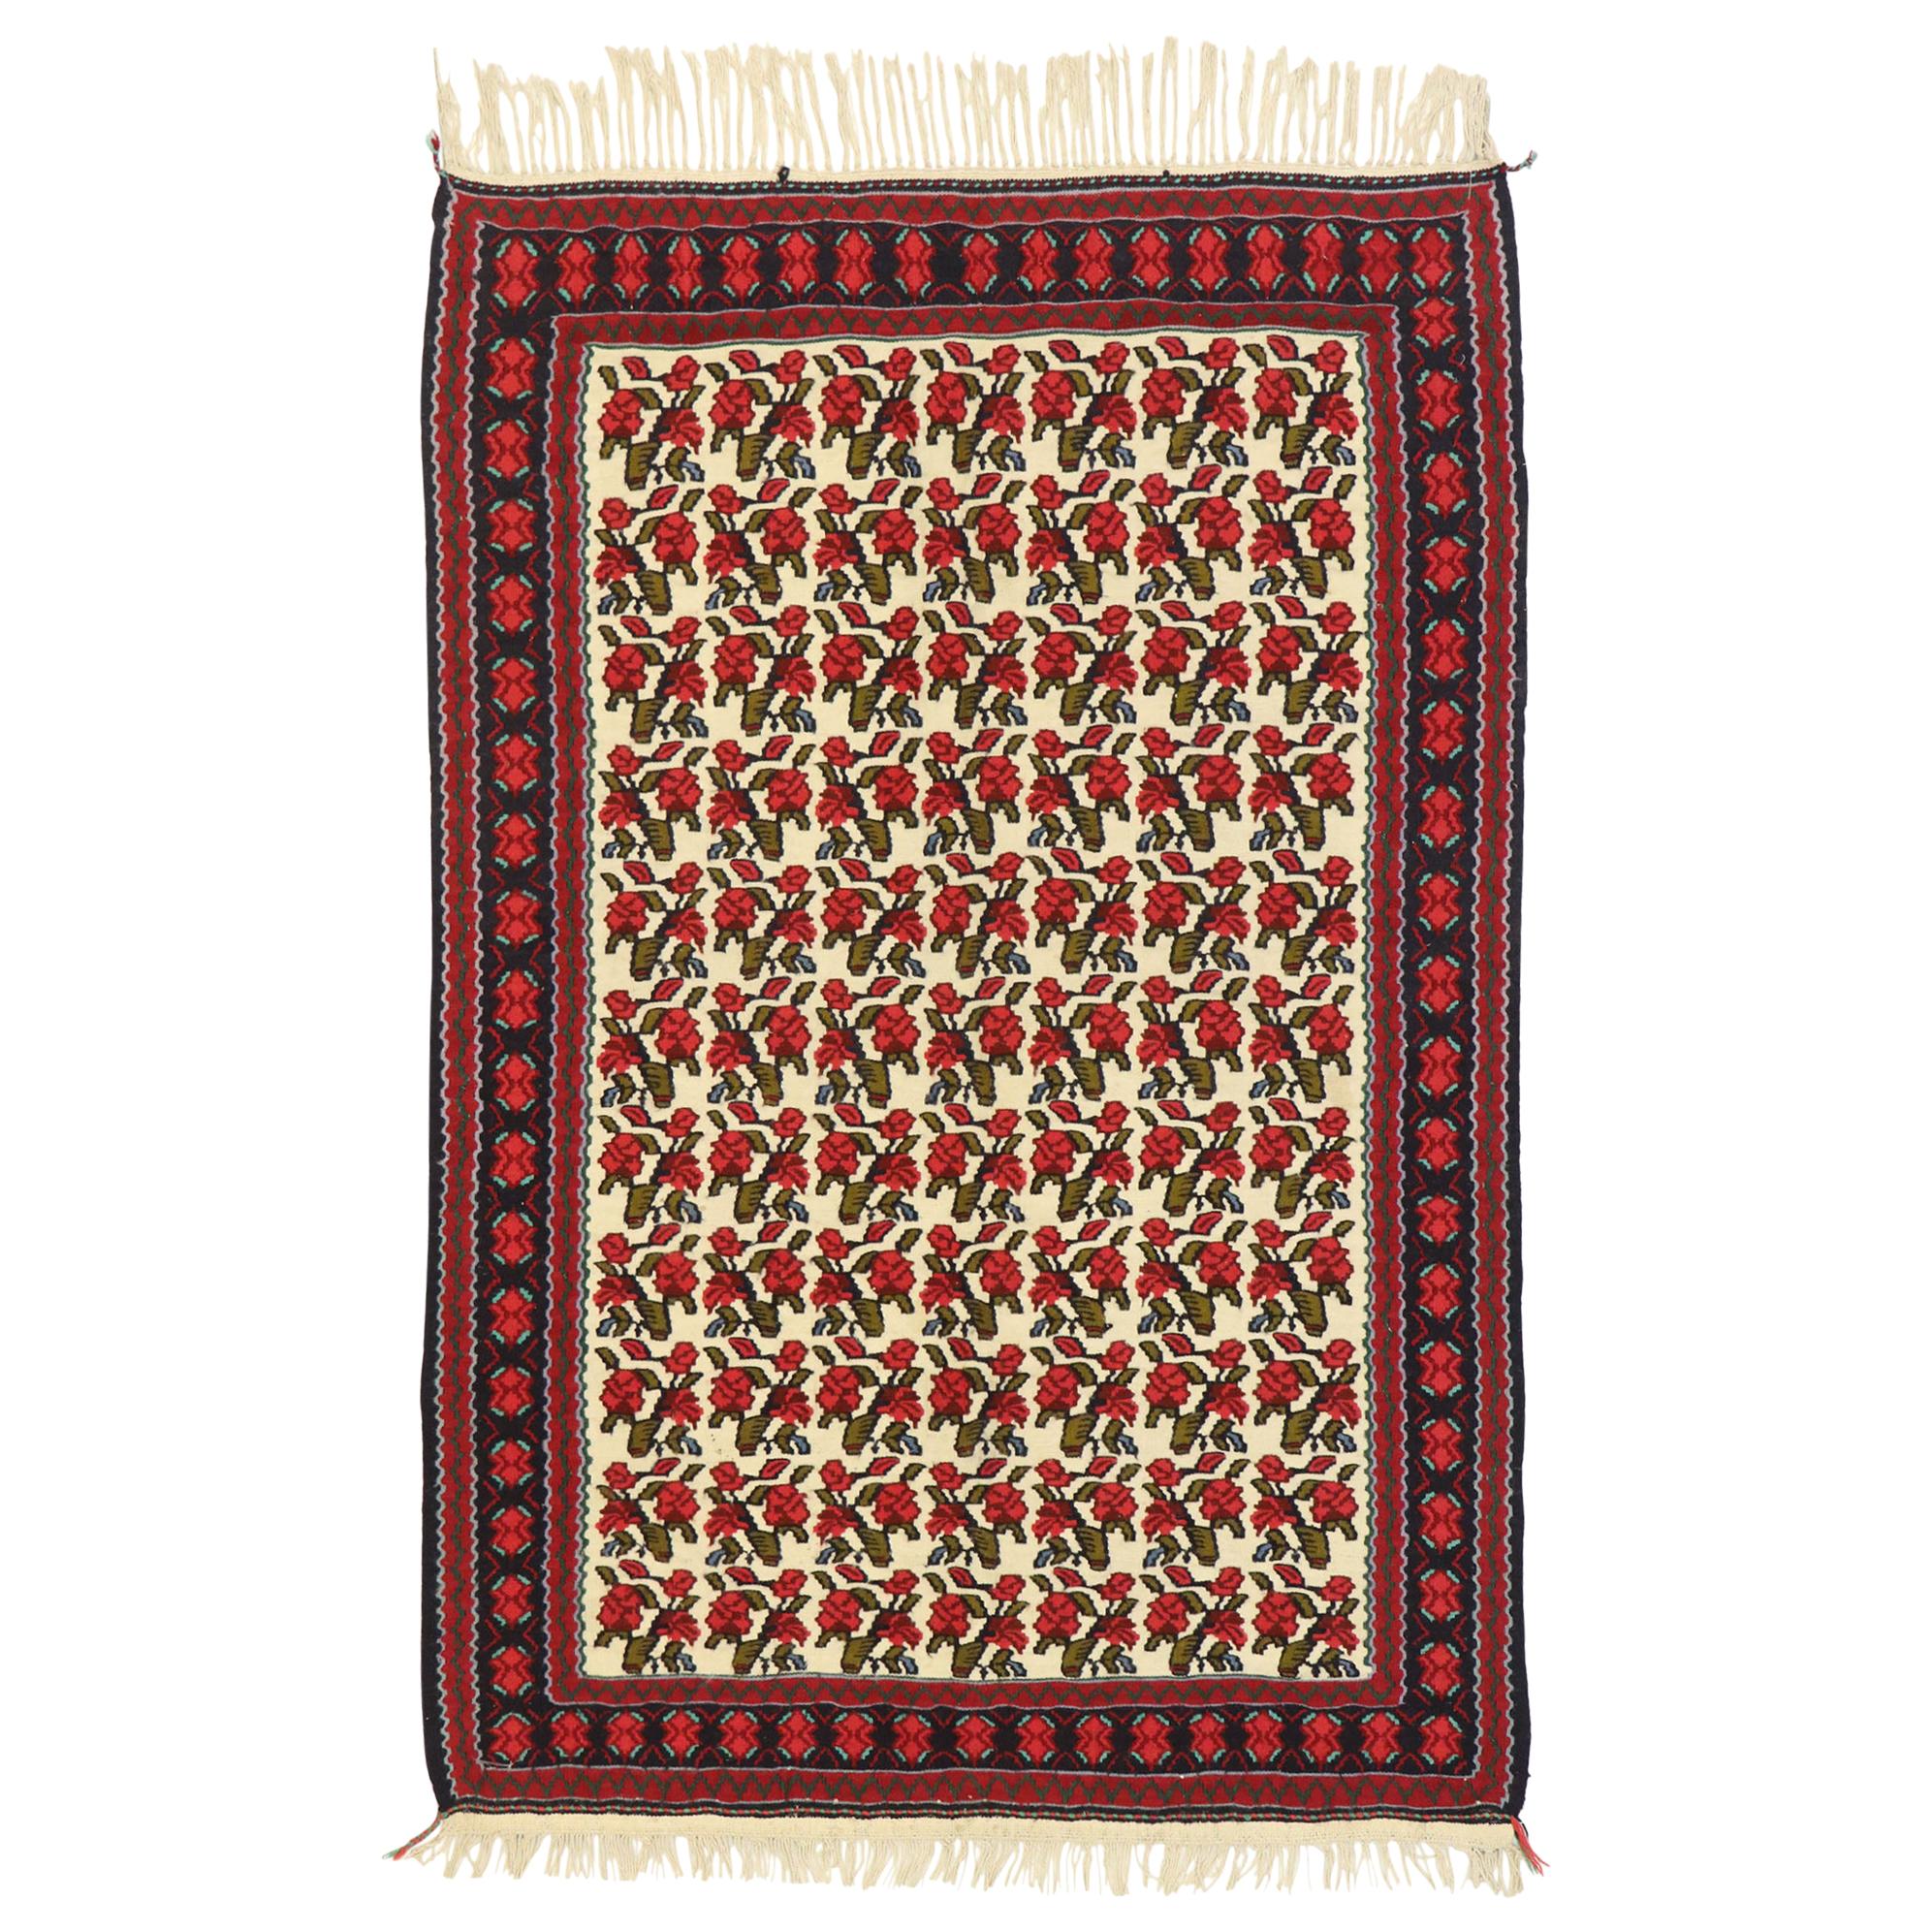 Vintage Persian Floral Kilim Rug with English Tudor Manor House Style